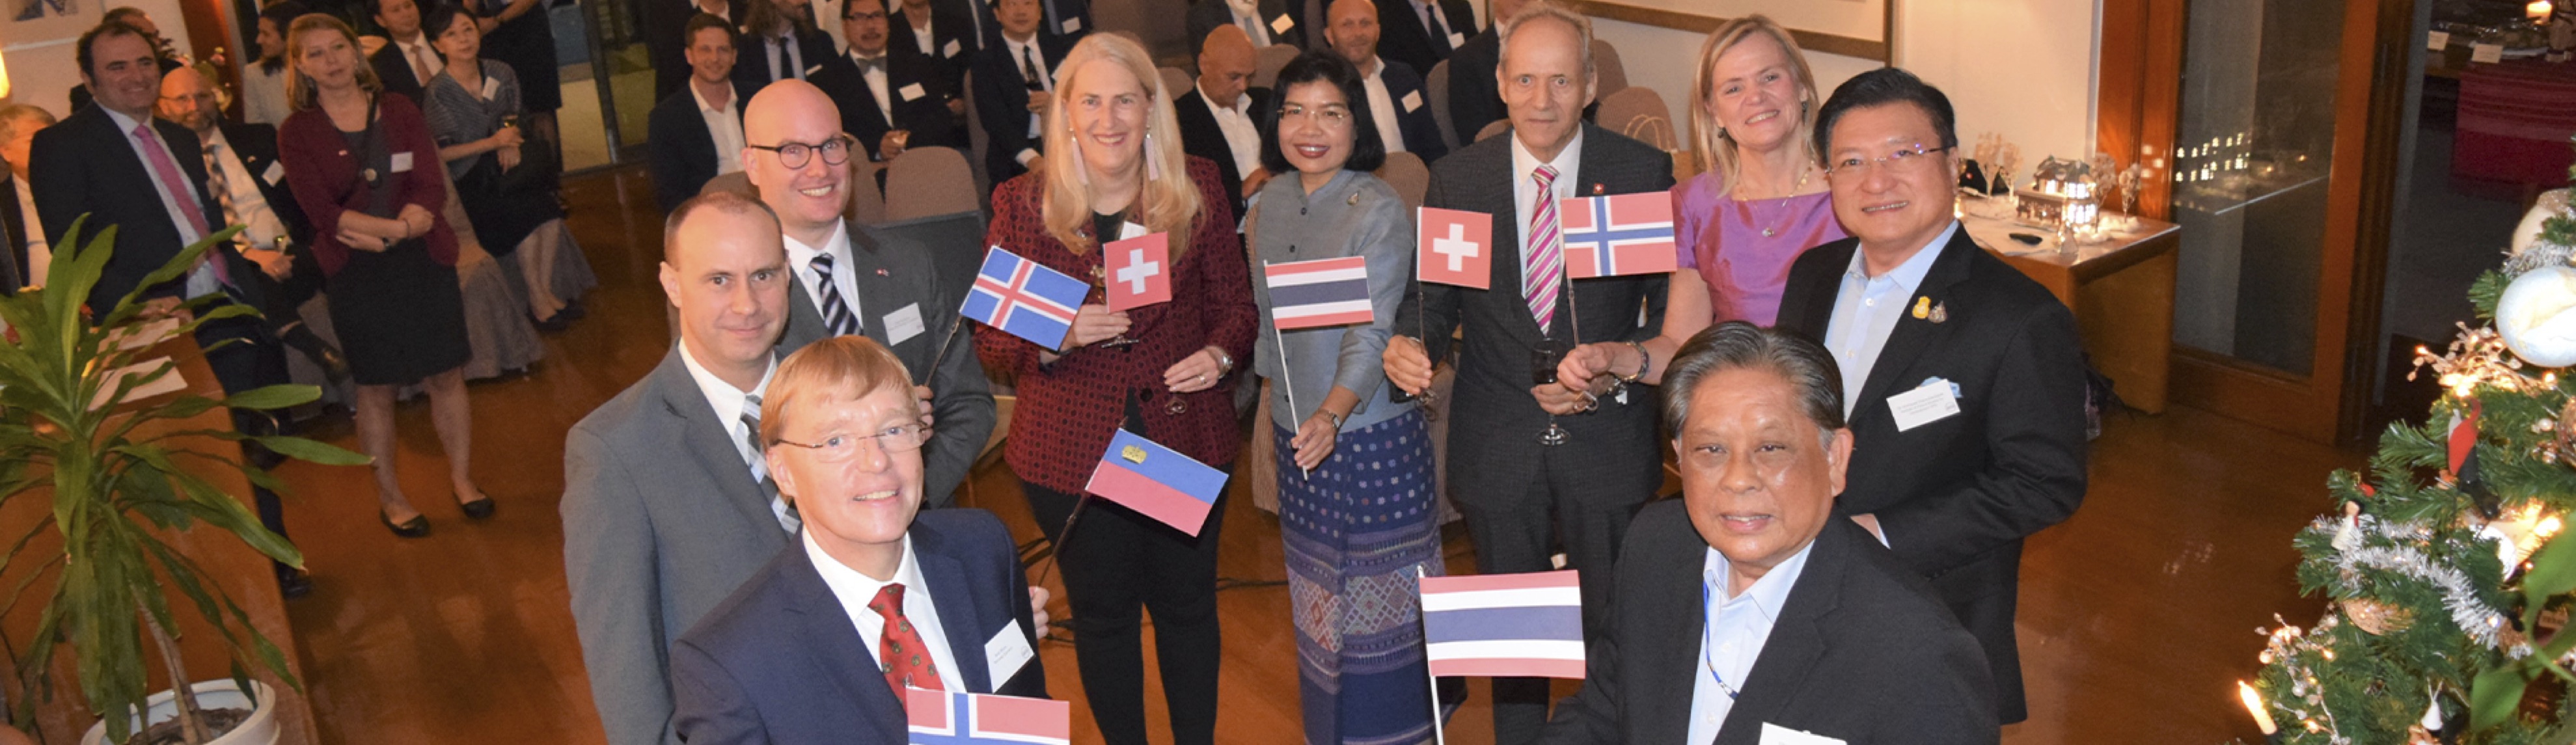 The launch of Thai-EFTA Business Circle in 2020 to push forward the Thailand-EFTA Free Trade Agreement.